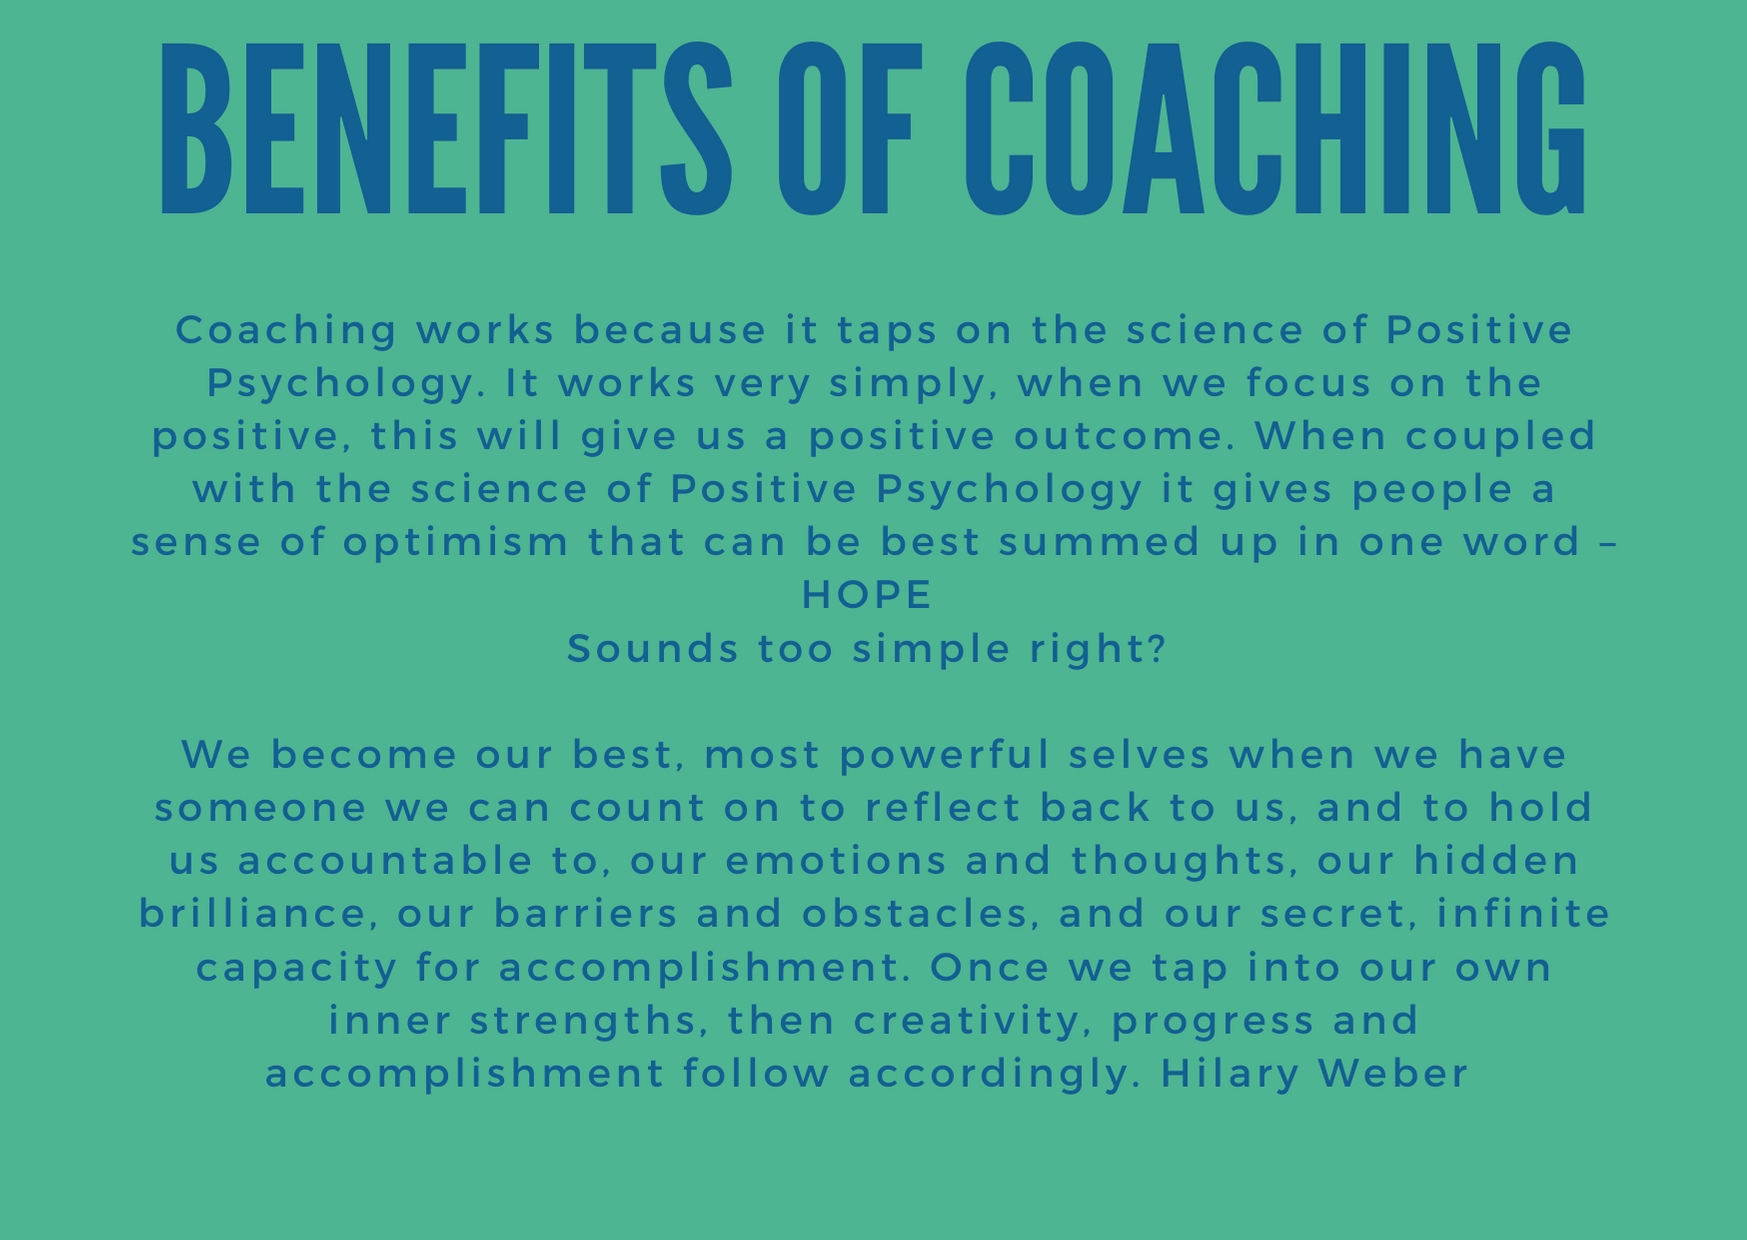 GrowthUp Benefits of Coaching